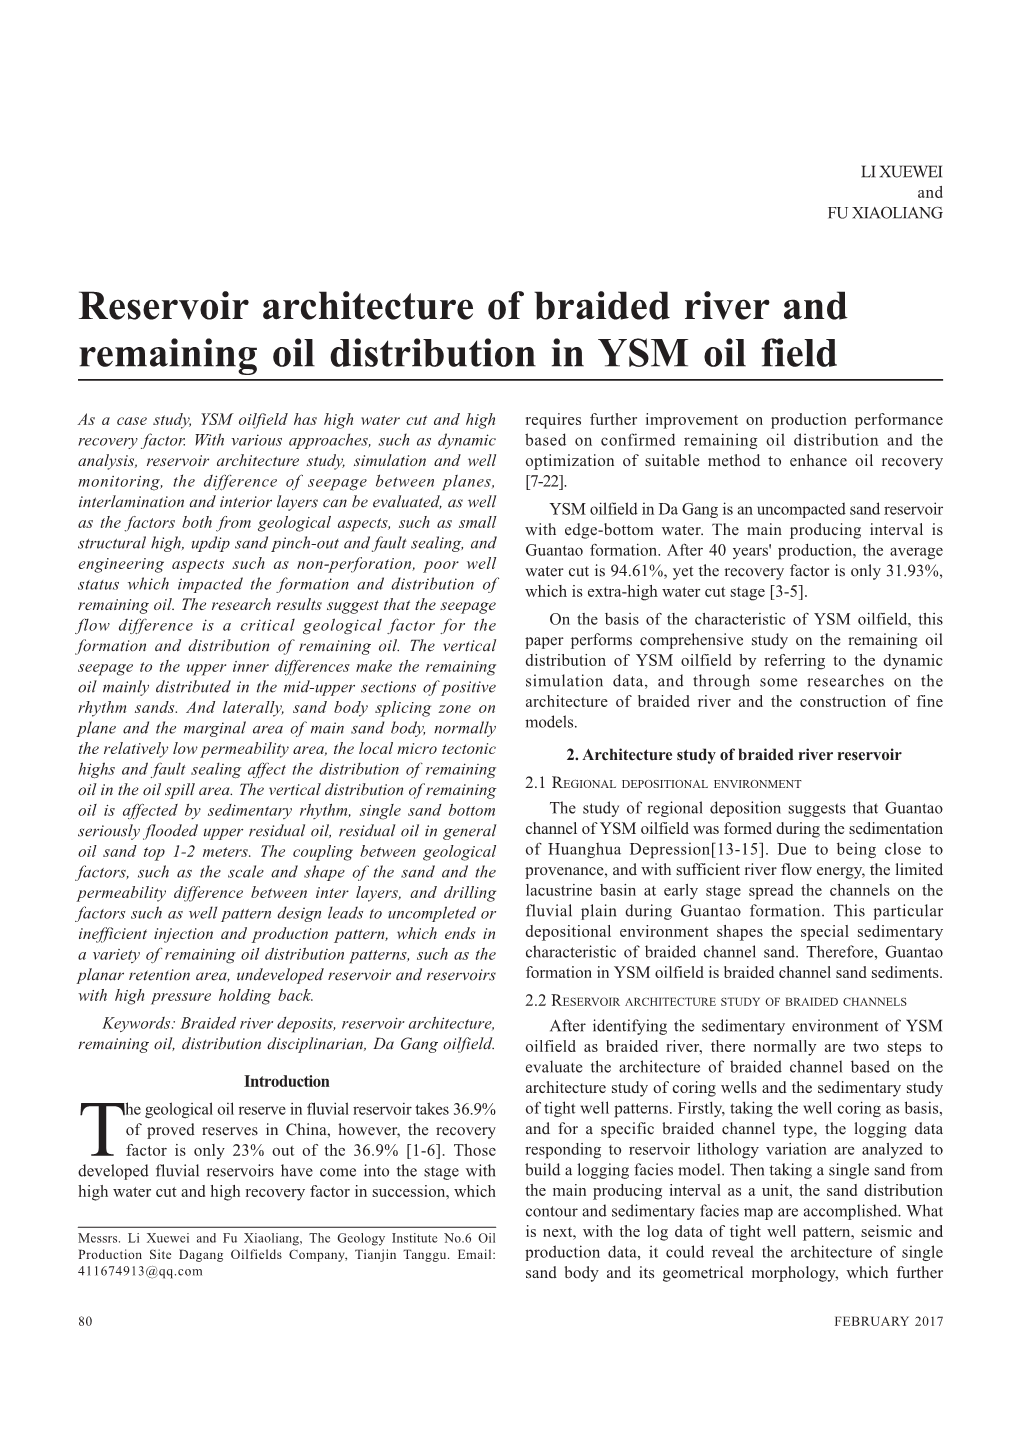 Reservoir Architecture of Braided River and Remaining Oil Distribution in YSM Oil Field